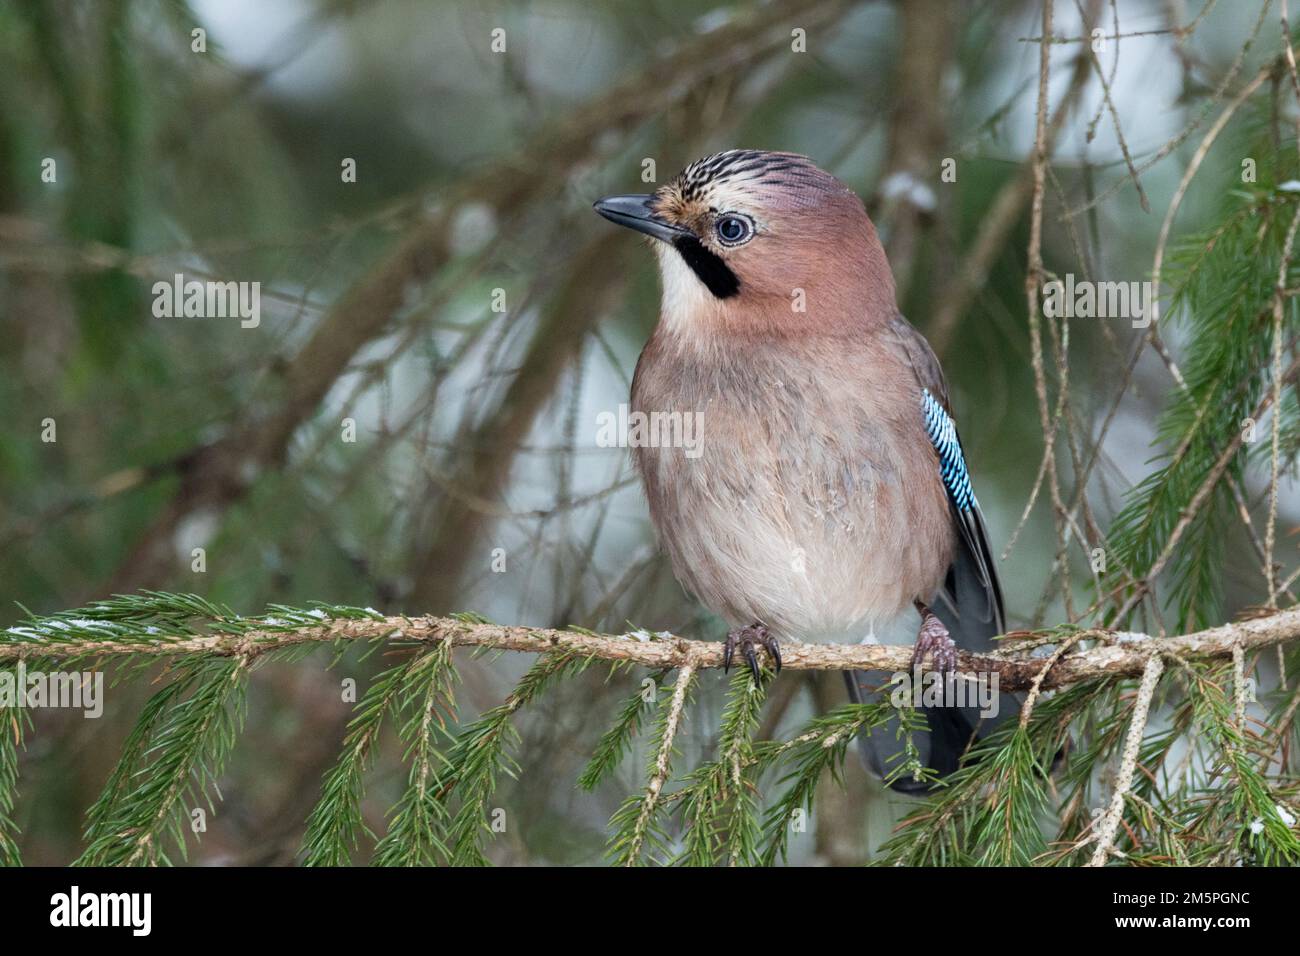 Close-up of a curious and watchful Eurasian jay perched in a boreal forest in Estonia, Northern Europe Stock Photo